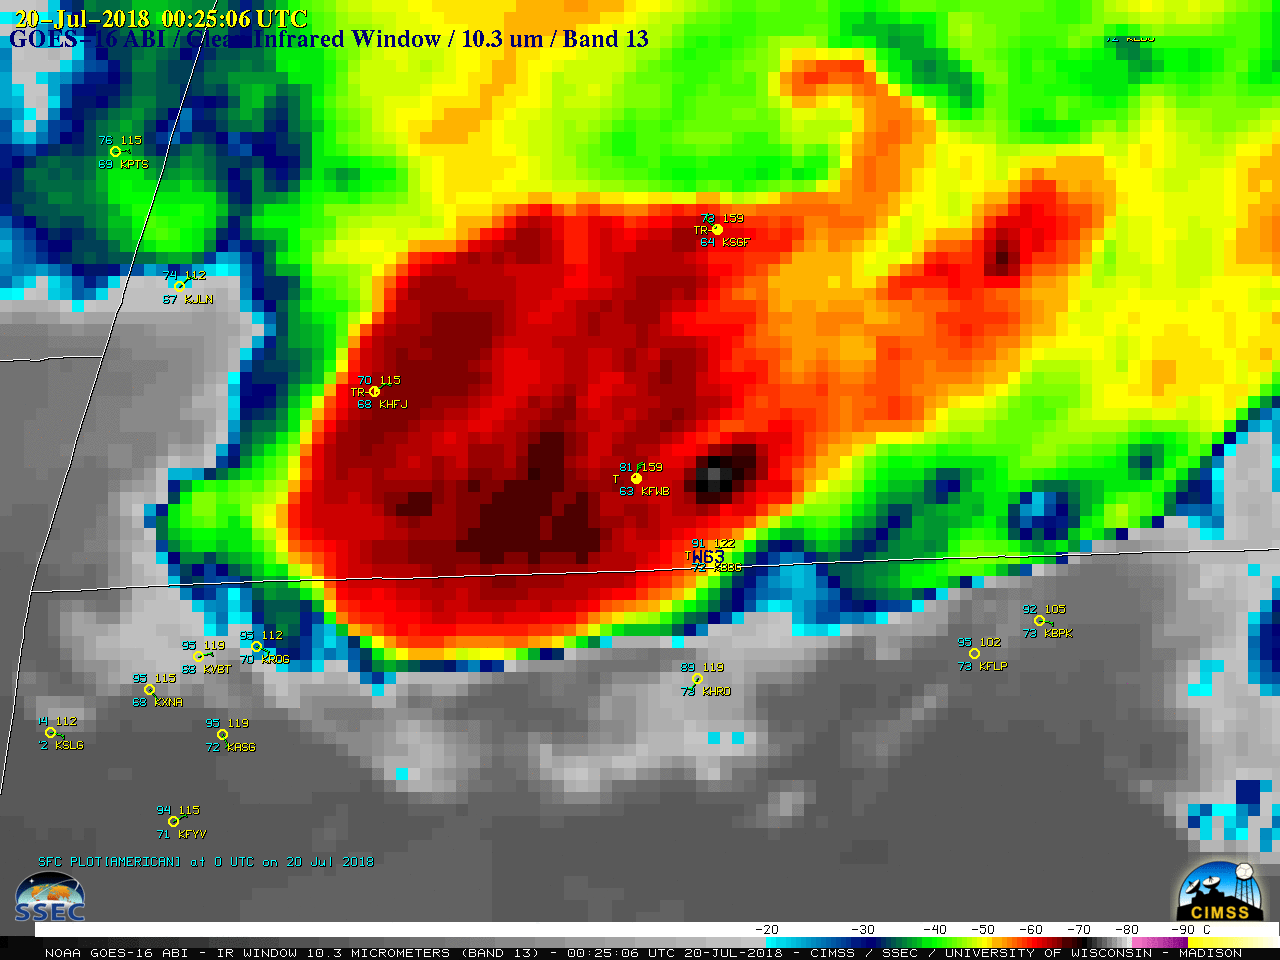 GOES-16 "Clean" Infrared Window (10.3 µm), with hourly surface plots plotted in cyan/yellow and SPC storm reports plotted in dark blue [click to play MP4 animation | Animated GIF]